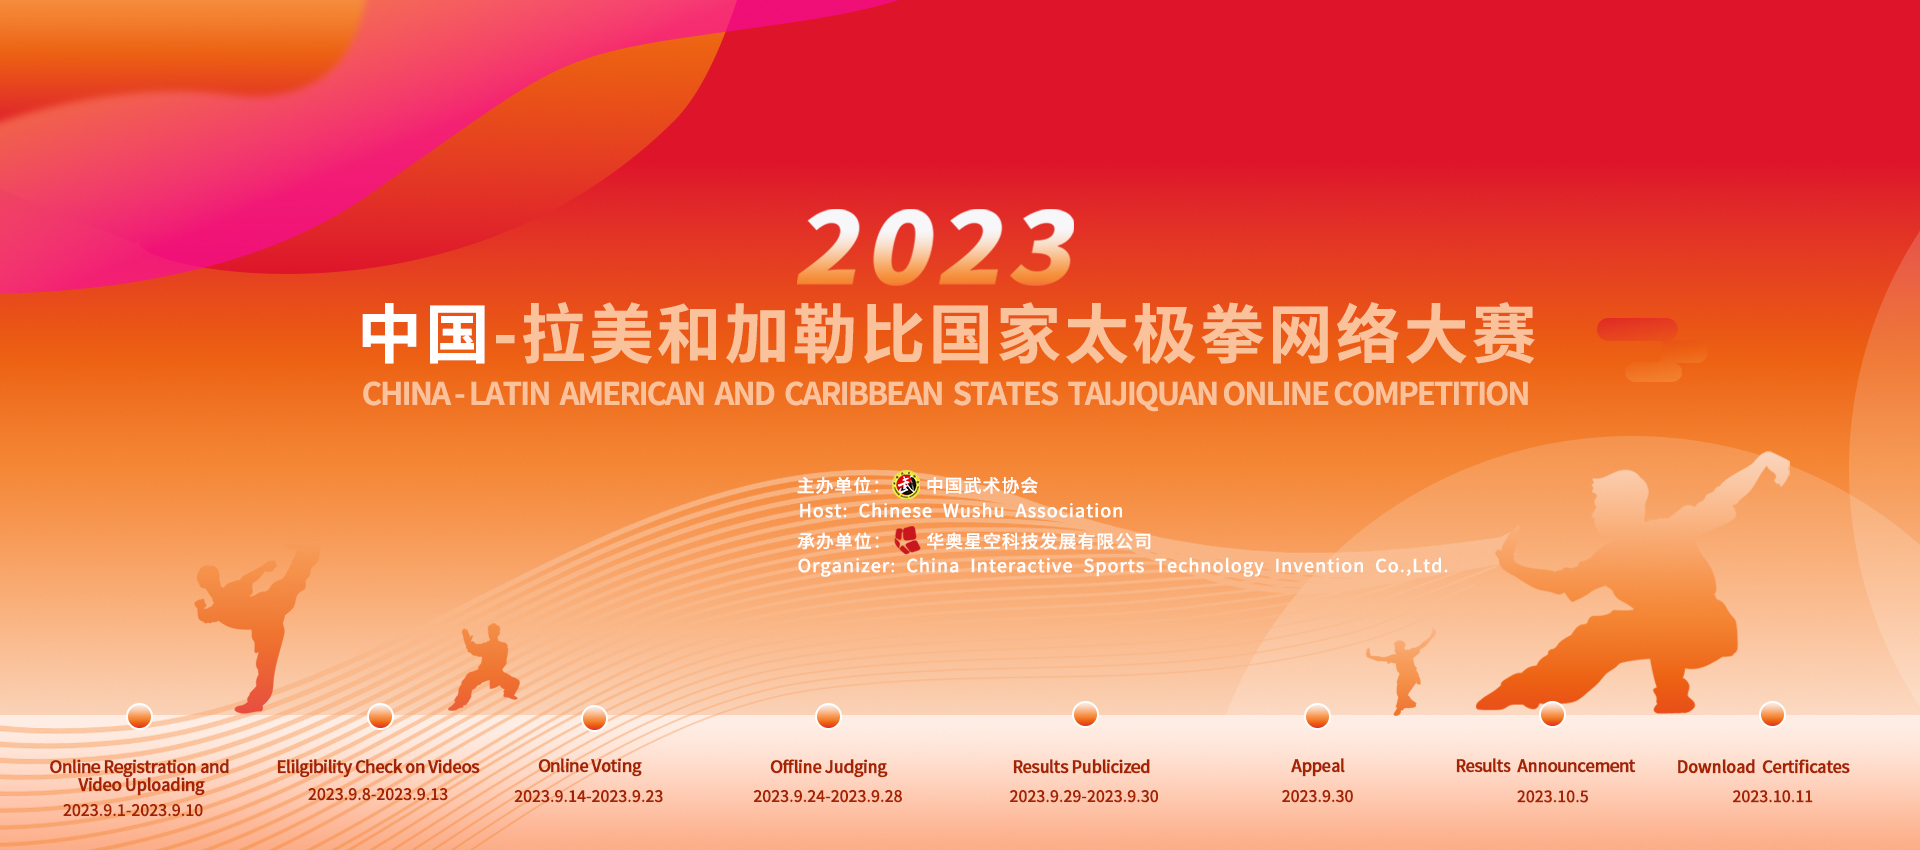 China-Latin American and Caribbean Taijiquan Online Competition